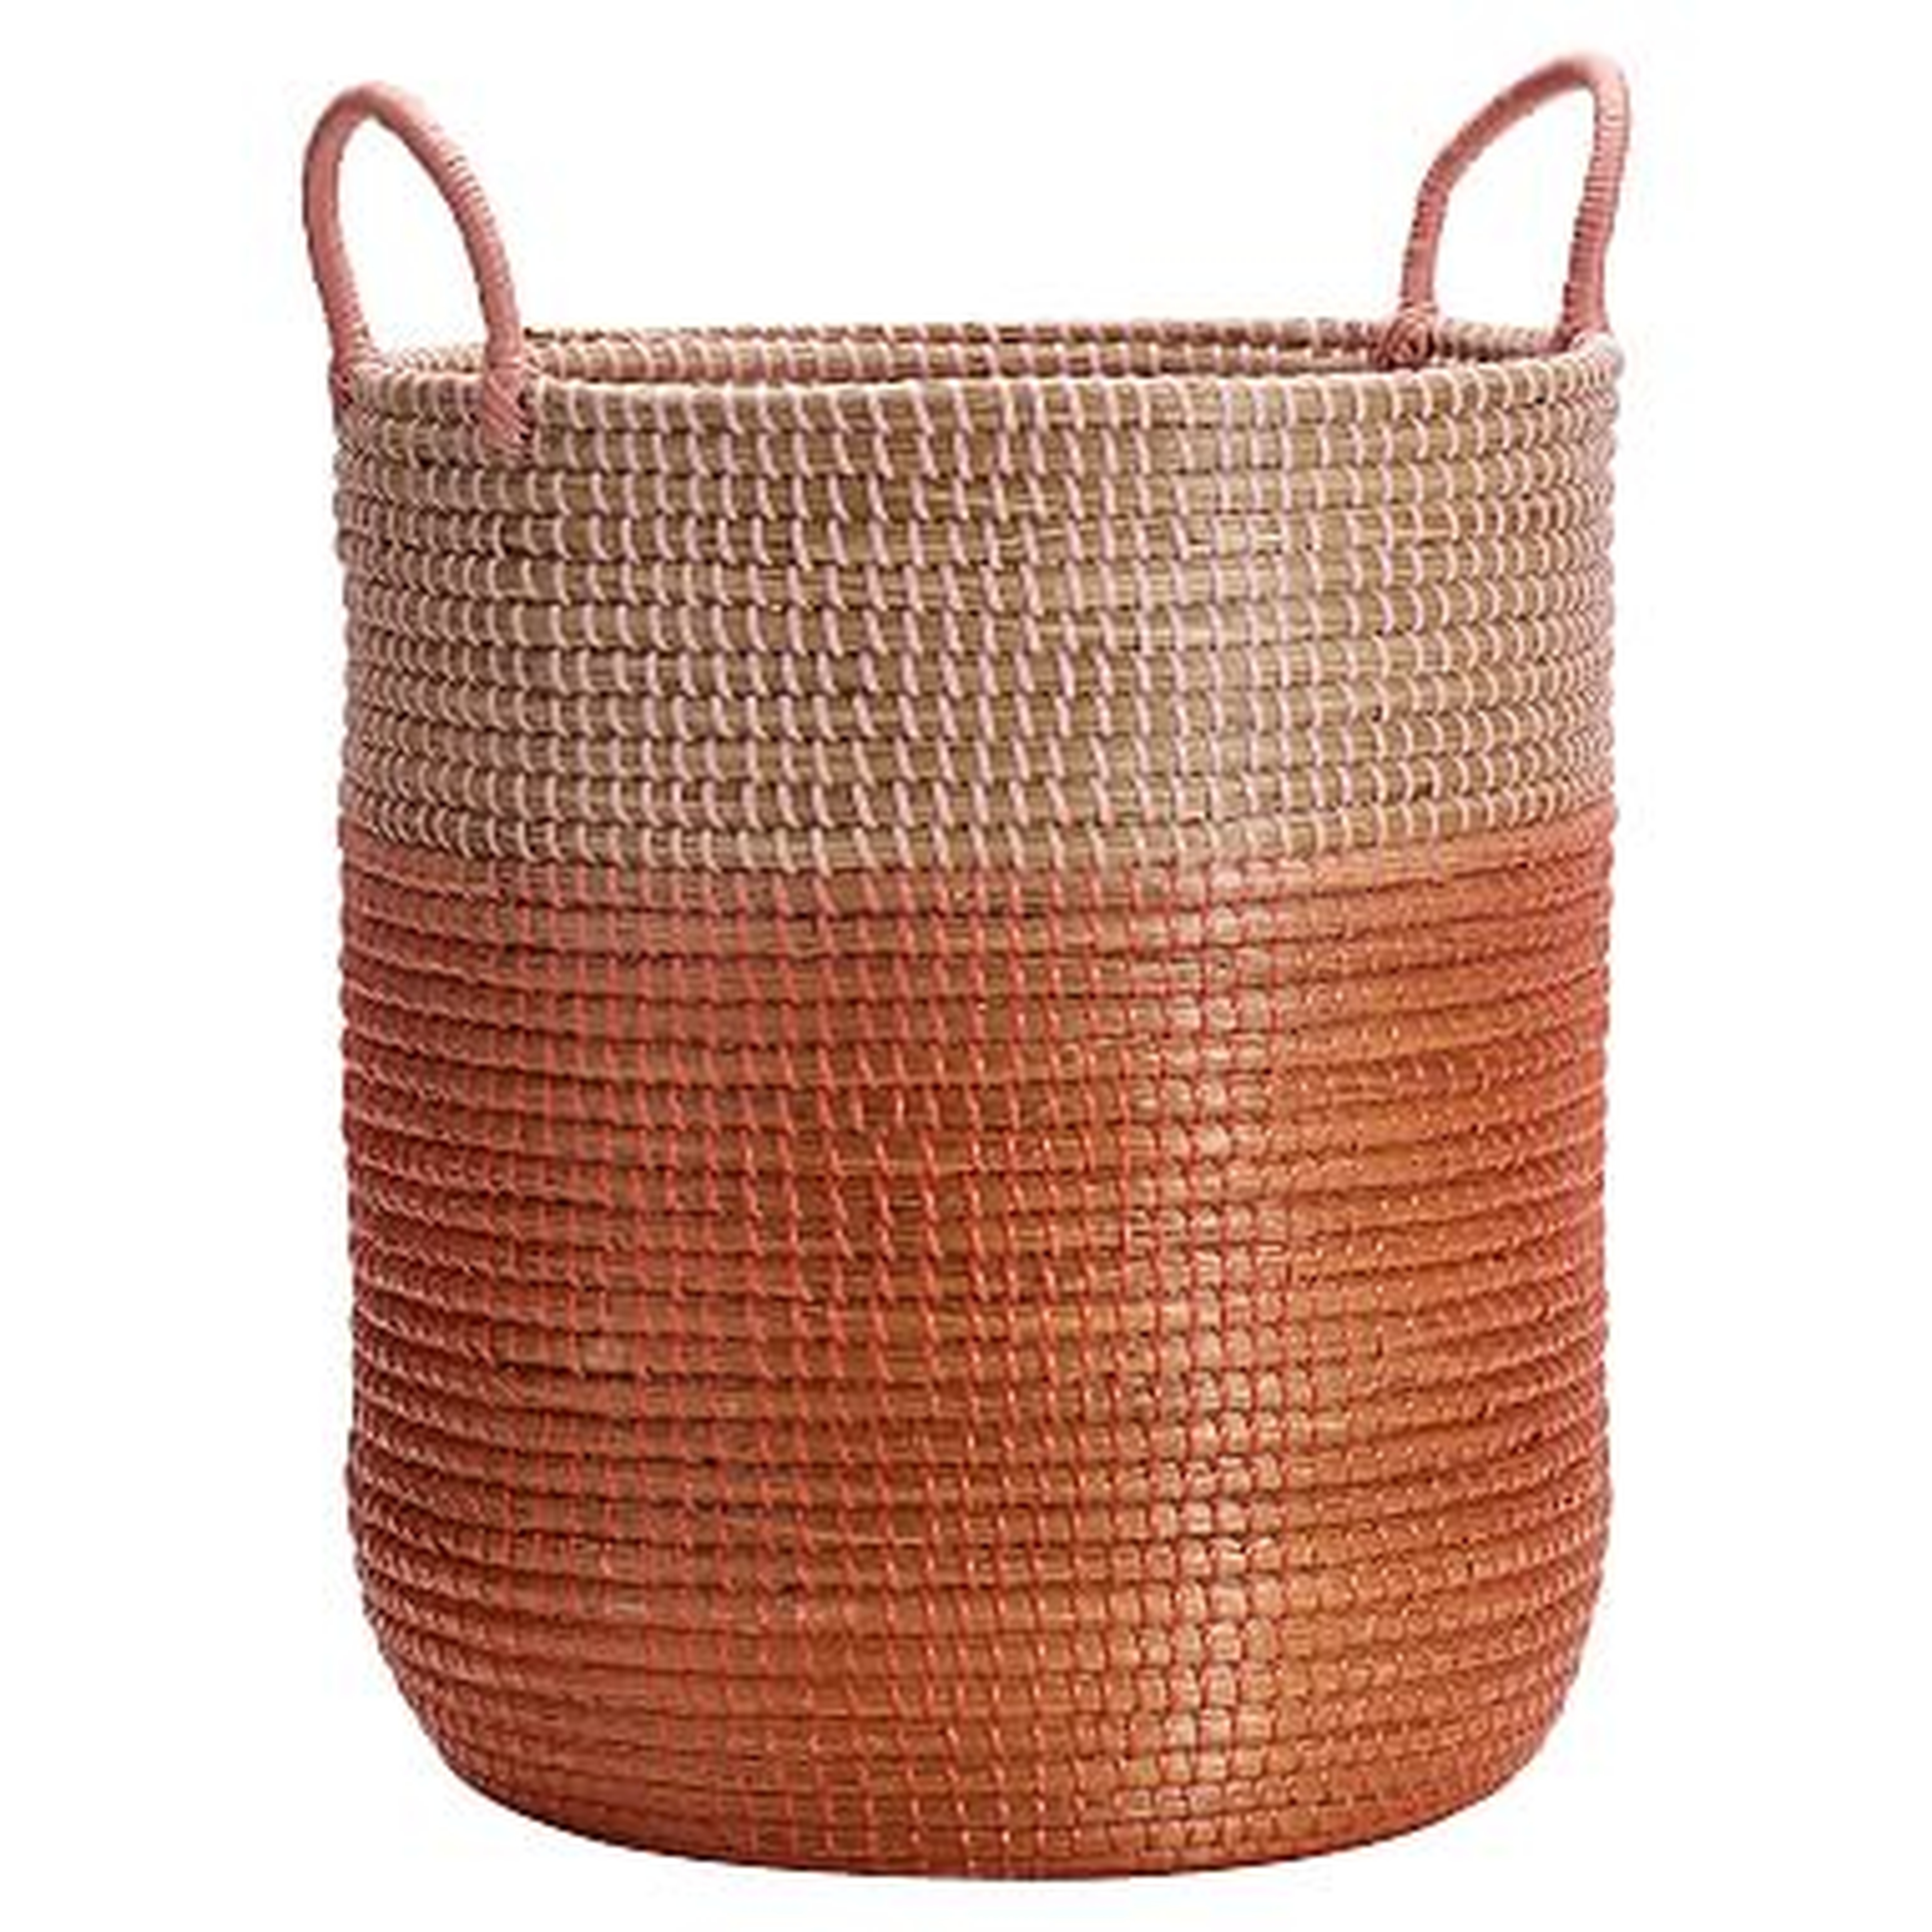 Woven Seagrass Storage Catchall, Blush Ombre - Pottery Barn Teen